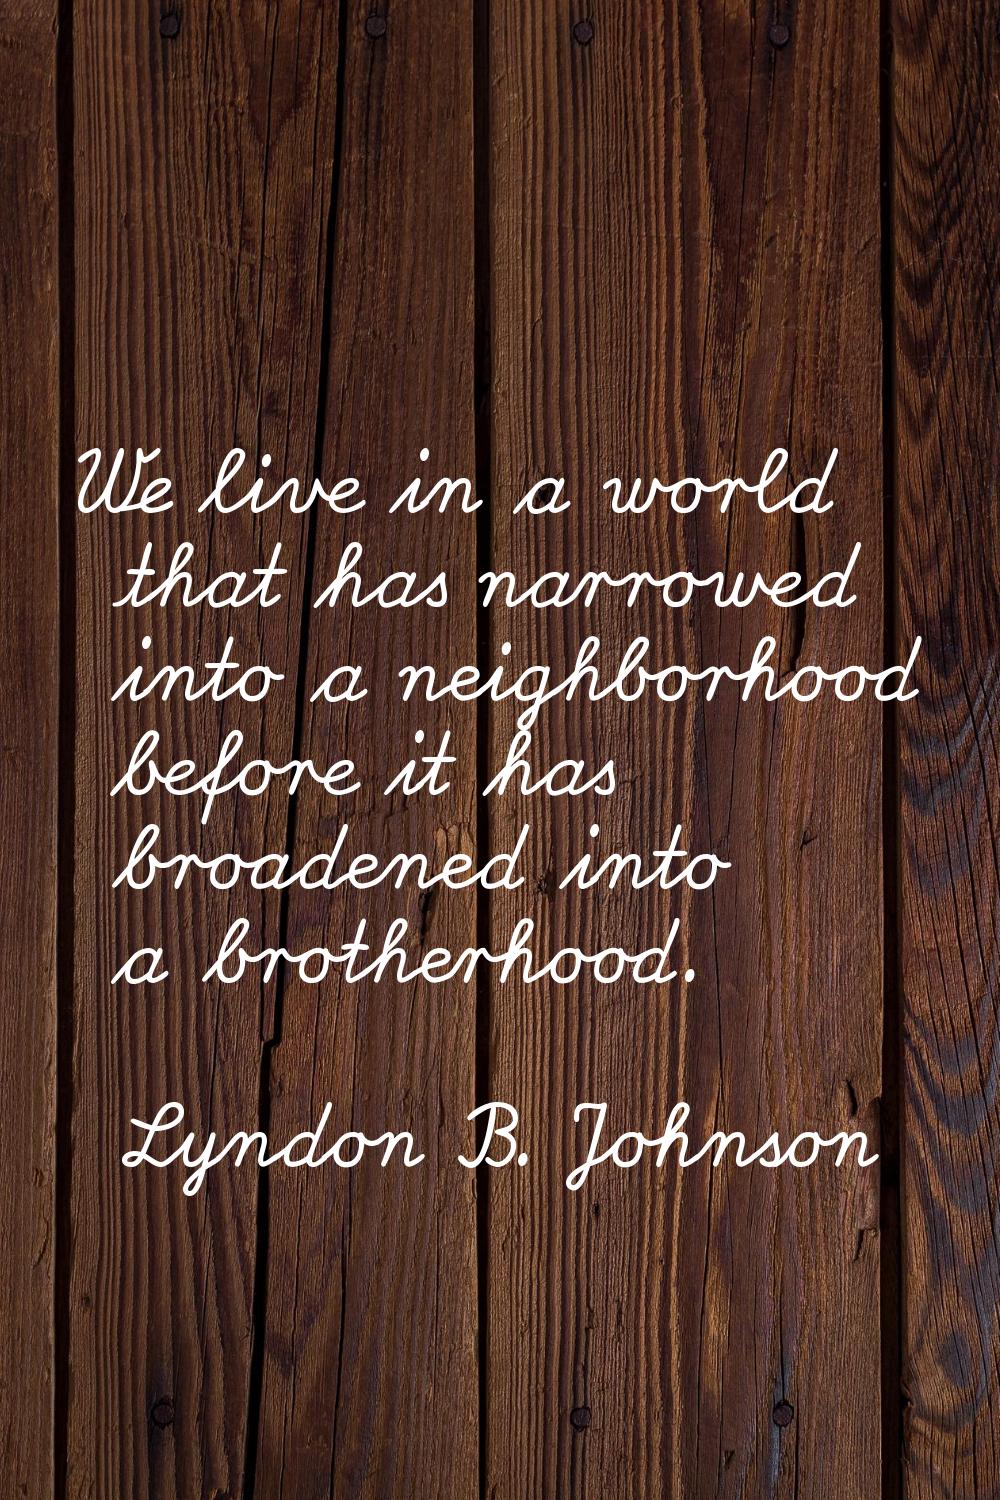 We live in a world that has narrowed into a neighborhood before it has broadened into a brotherhood